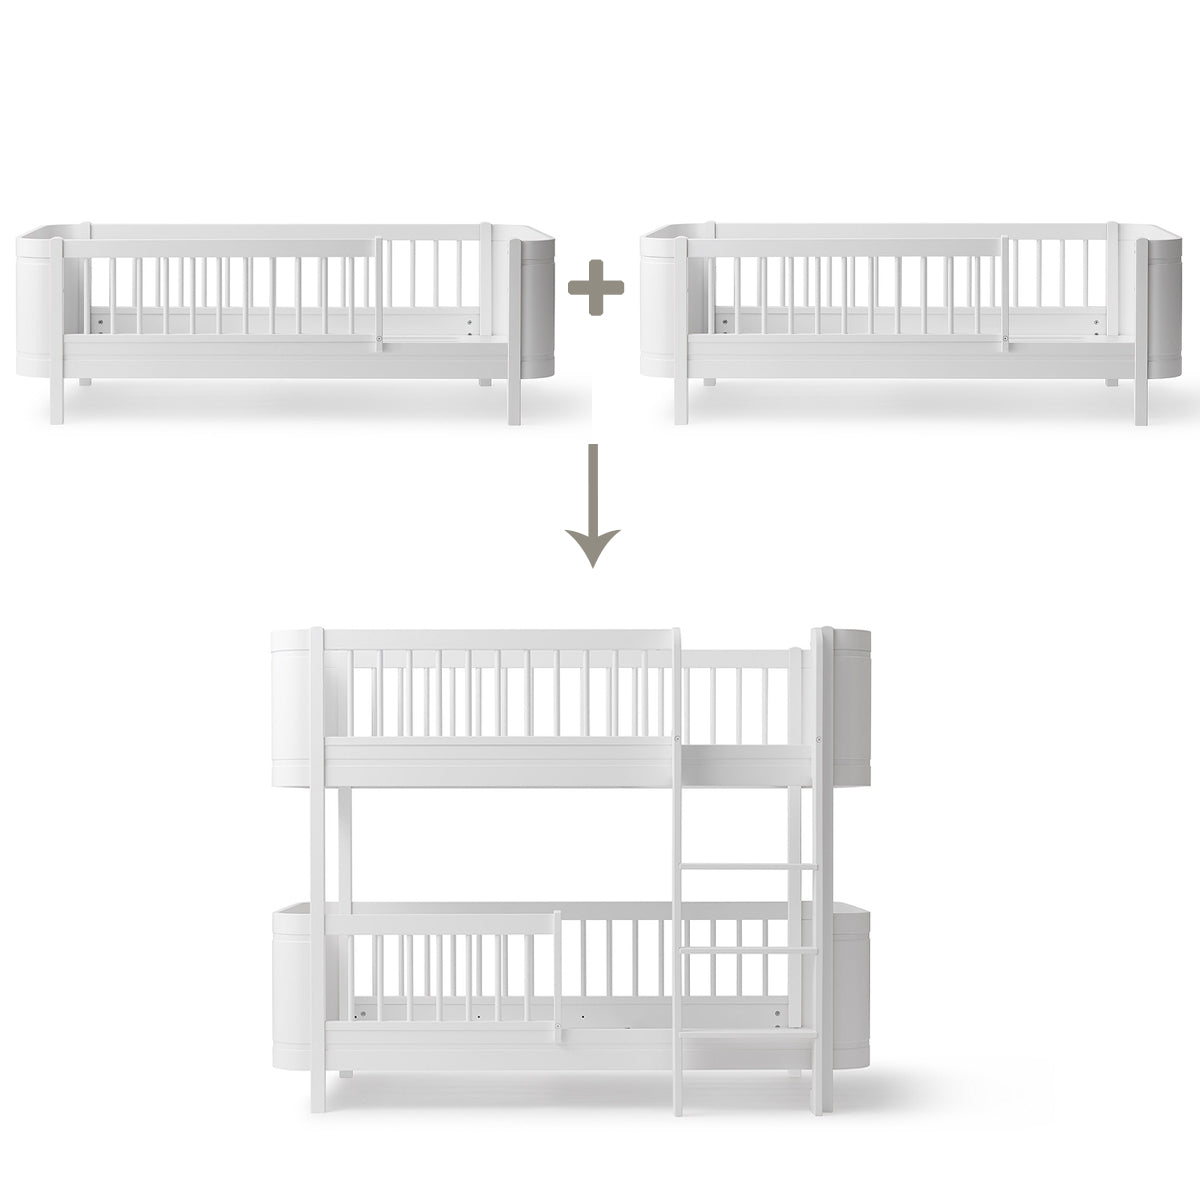 Conversion kit Oliver Furniture Wood Mini+ 2 junior beds to half-height bunk bed, white